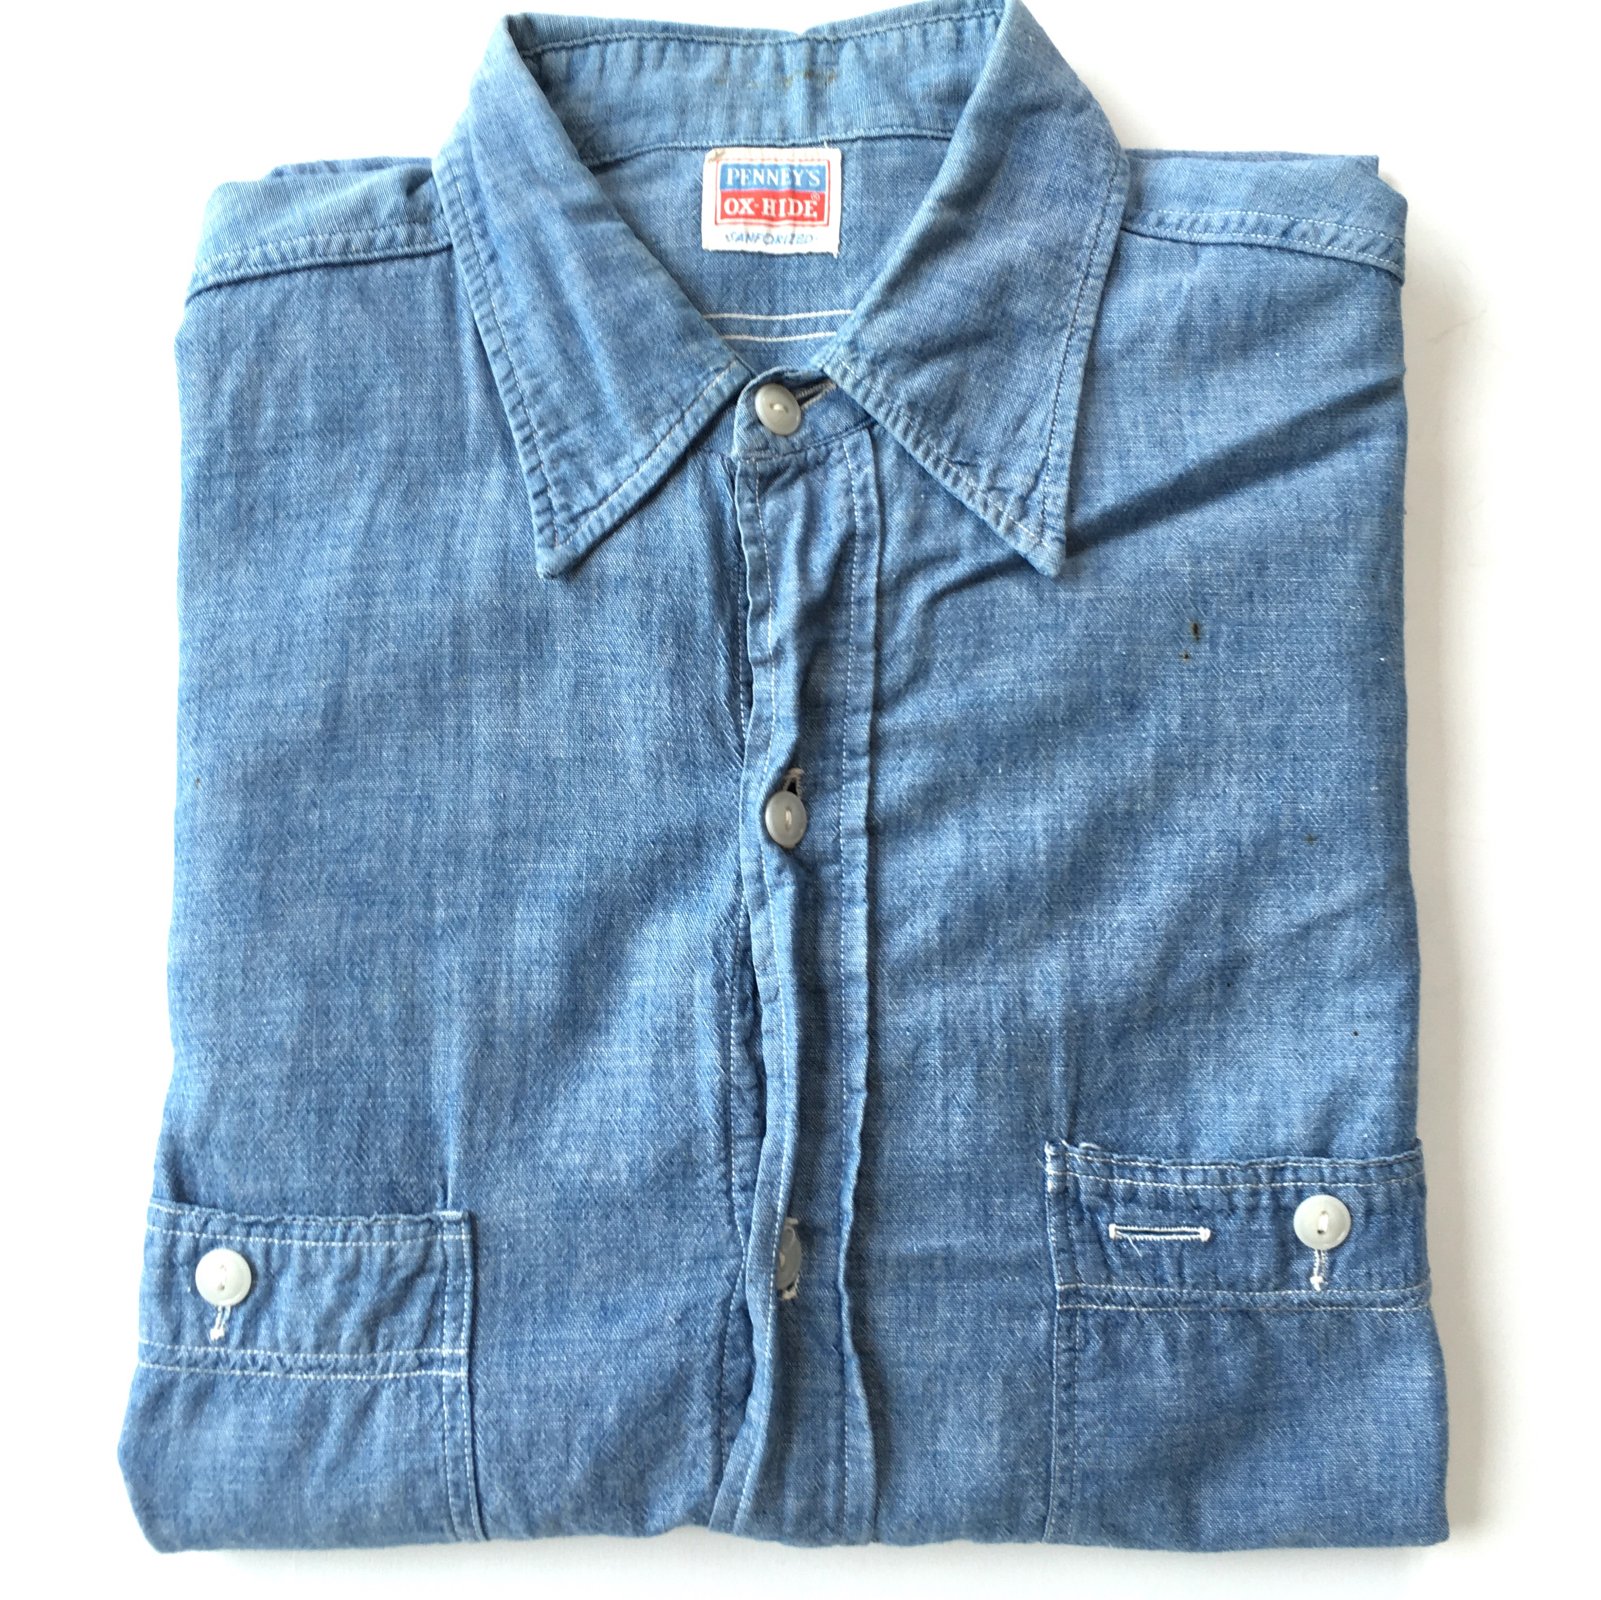 Image of Penney's OX-Hide Sanforized Chambray shirt